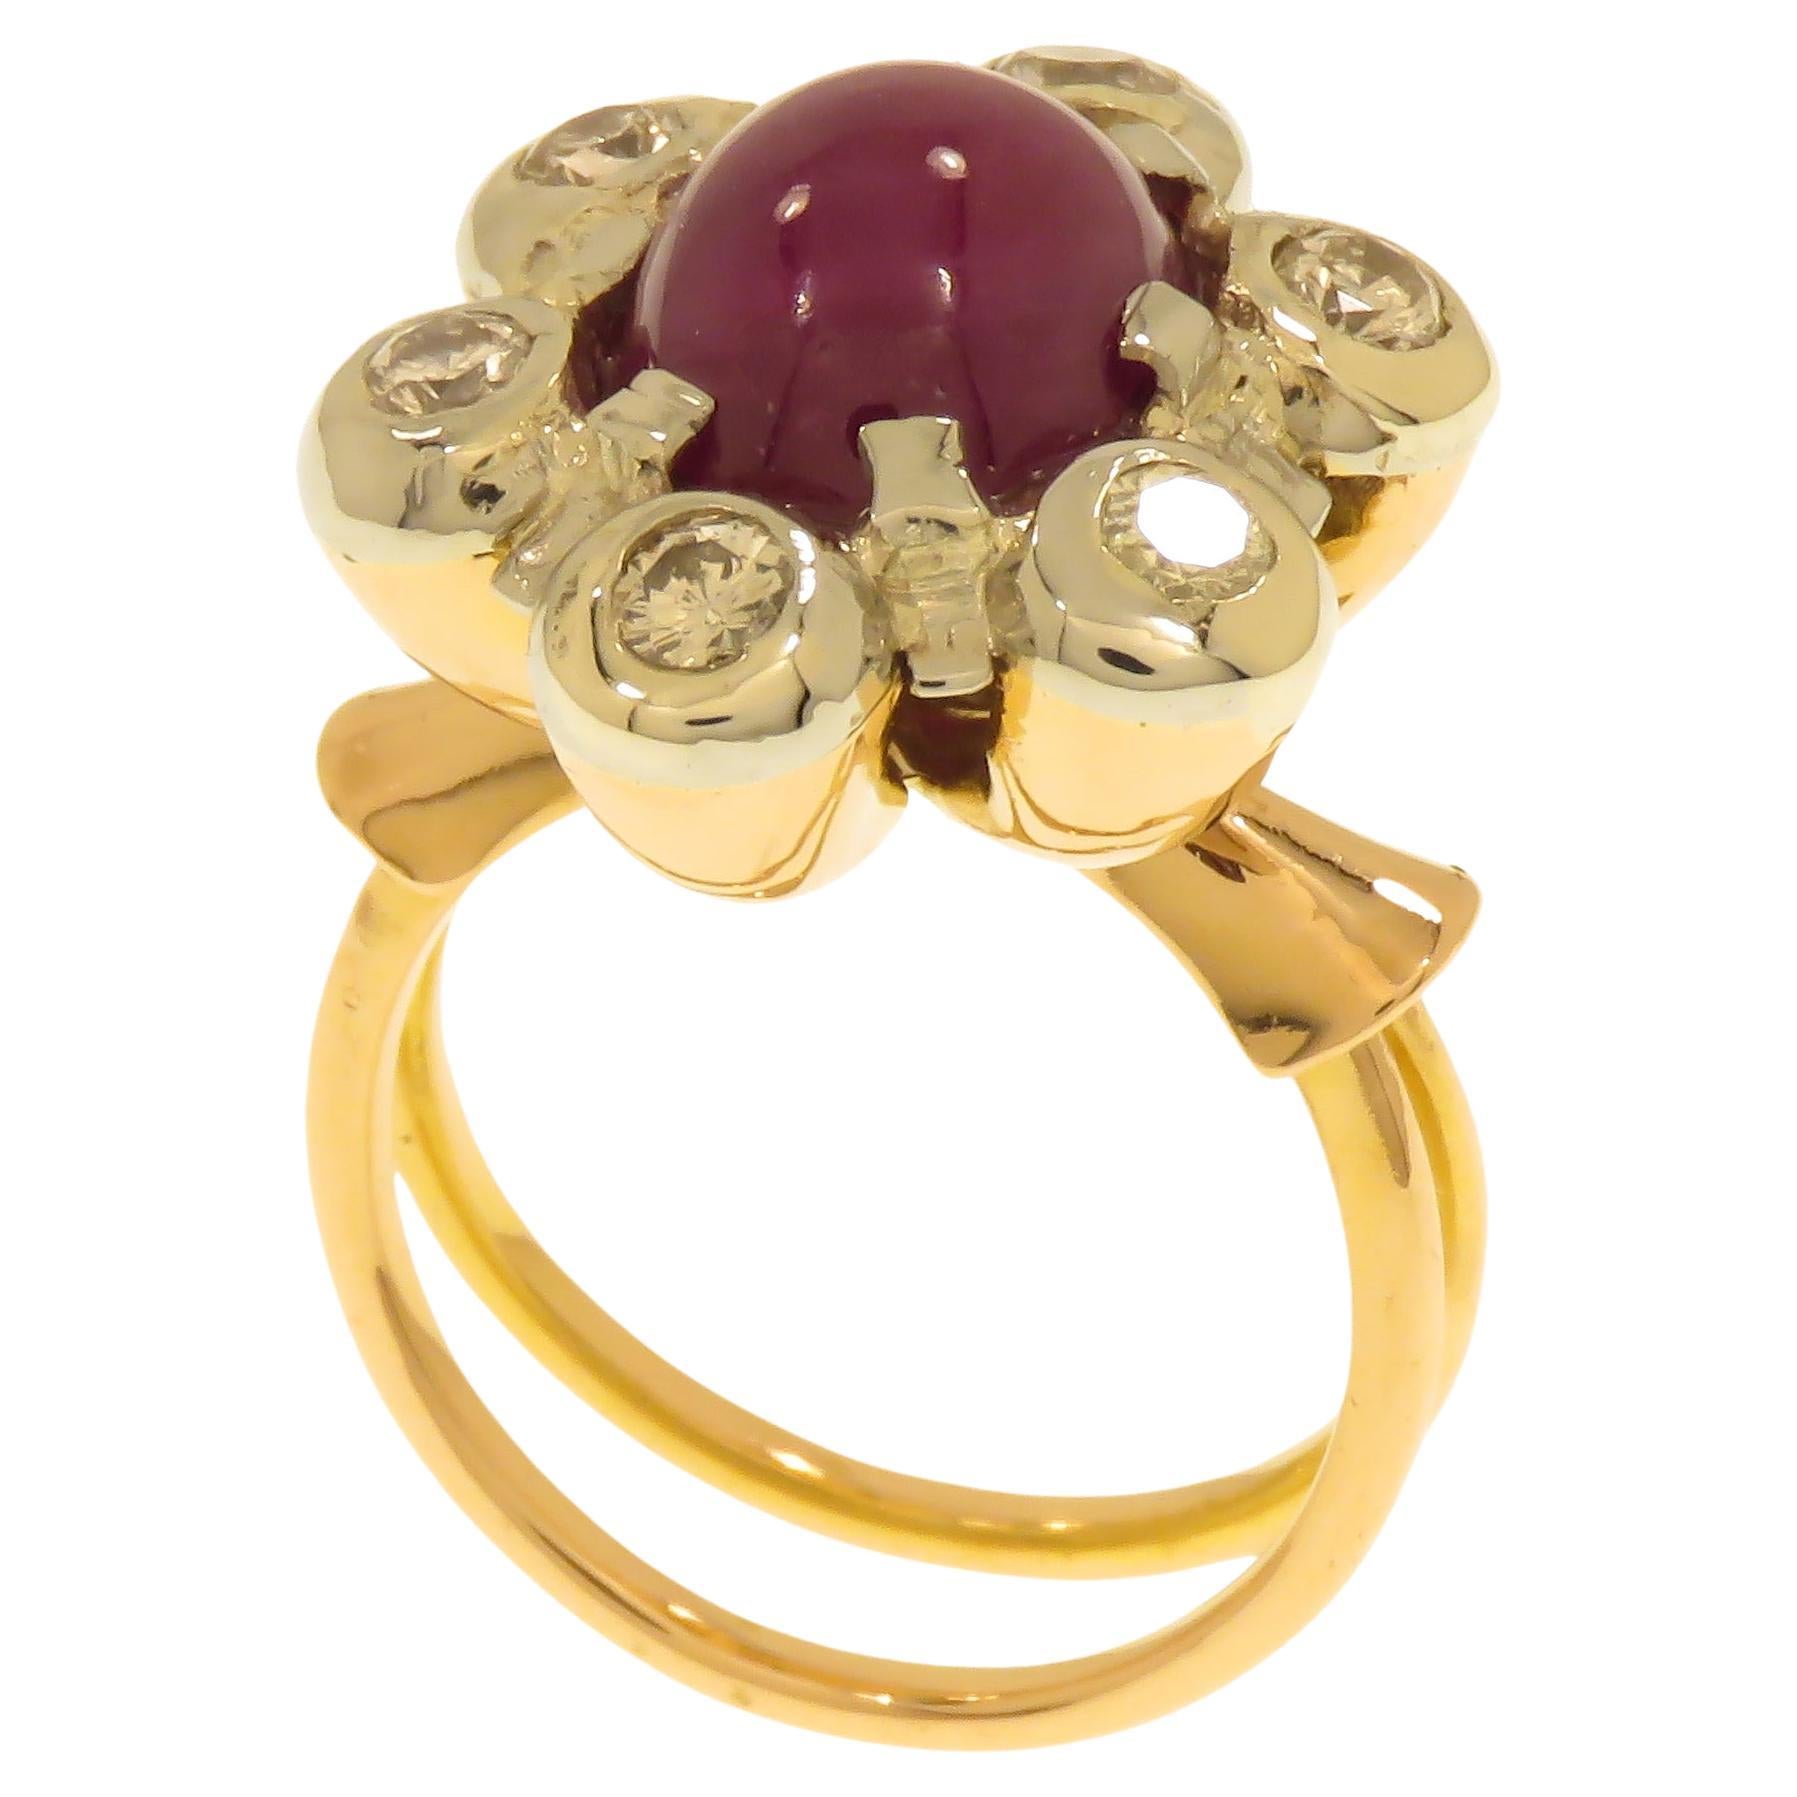 Antique 18 carat rose and white gold floral cluster ring with cabochon cut ruby 12 x 8 millimeters /  0.472 x 0.314 inches and brilliant cut white diamonds totally 0.50 carat circa. Dating back to 1950s apx. Finger Size: Us 5.5, Italian 10, French